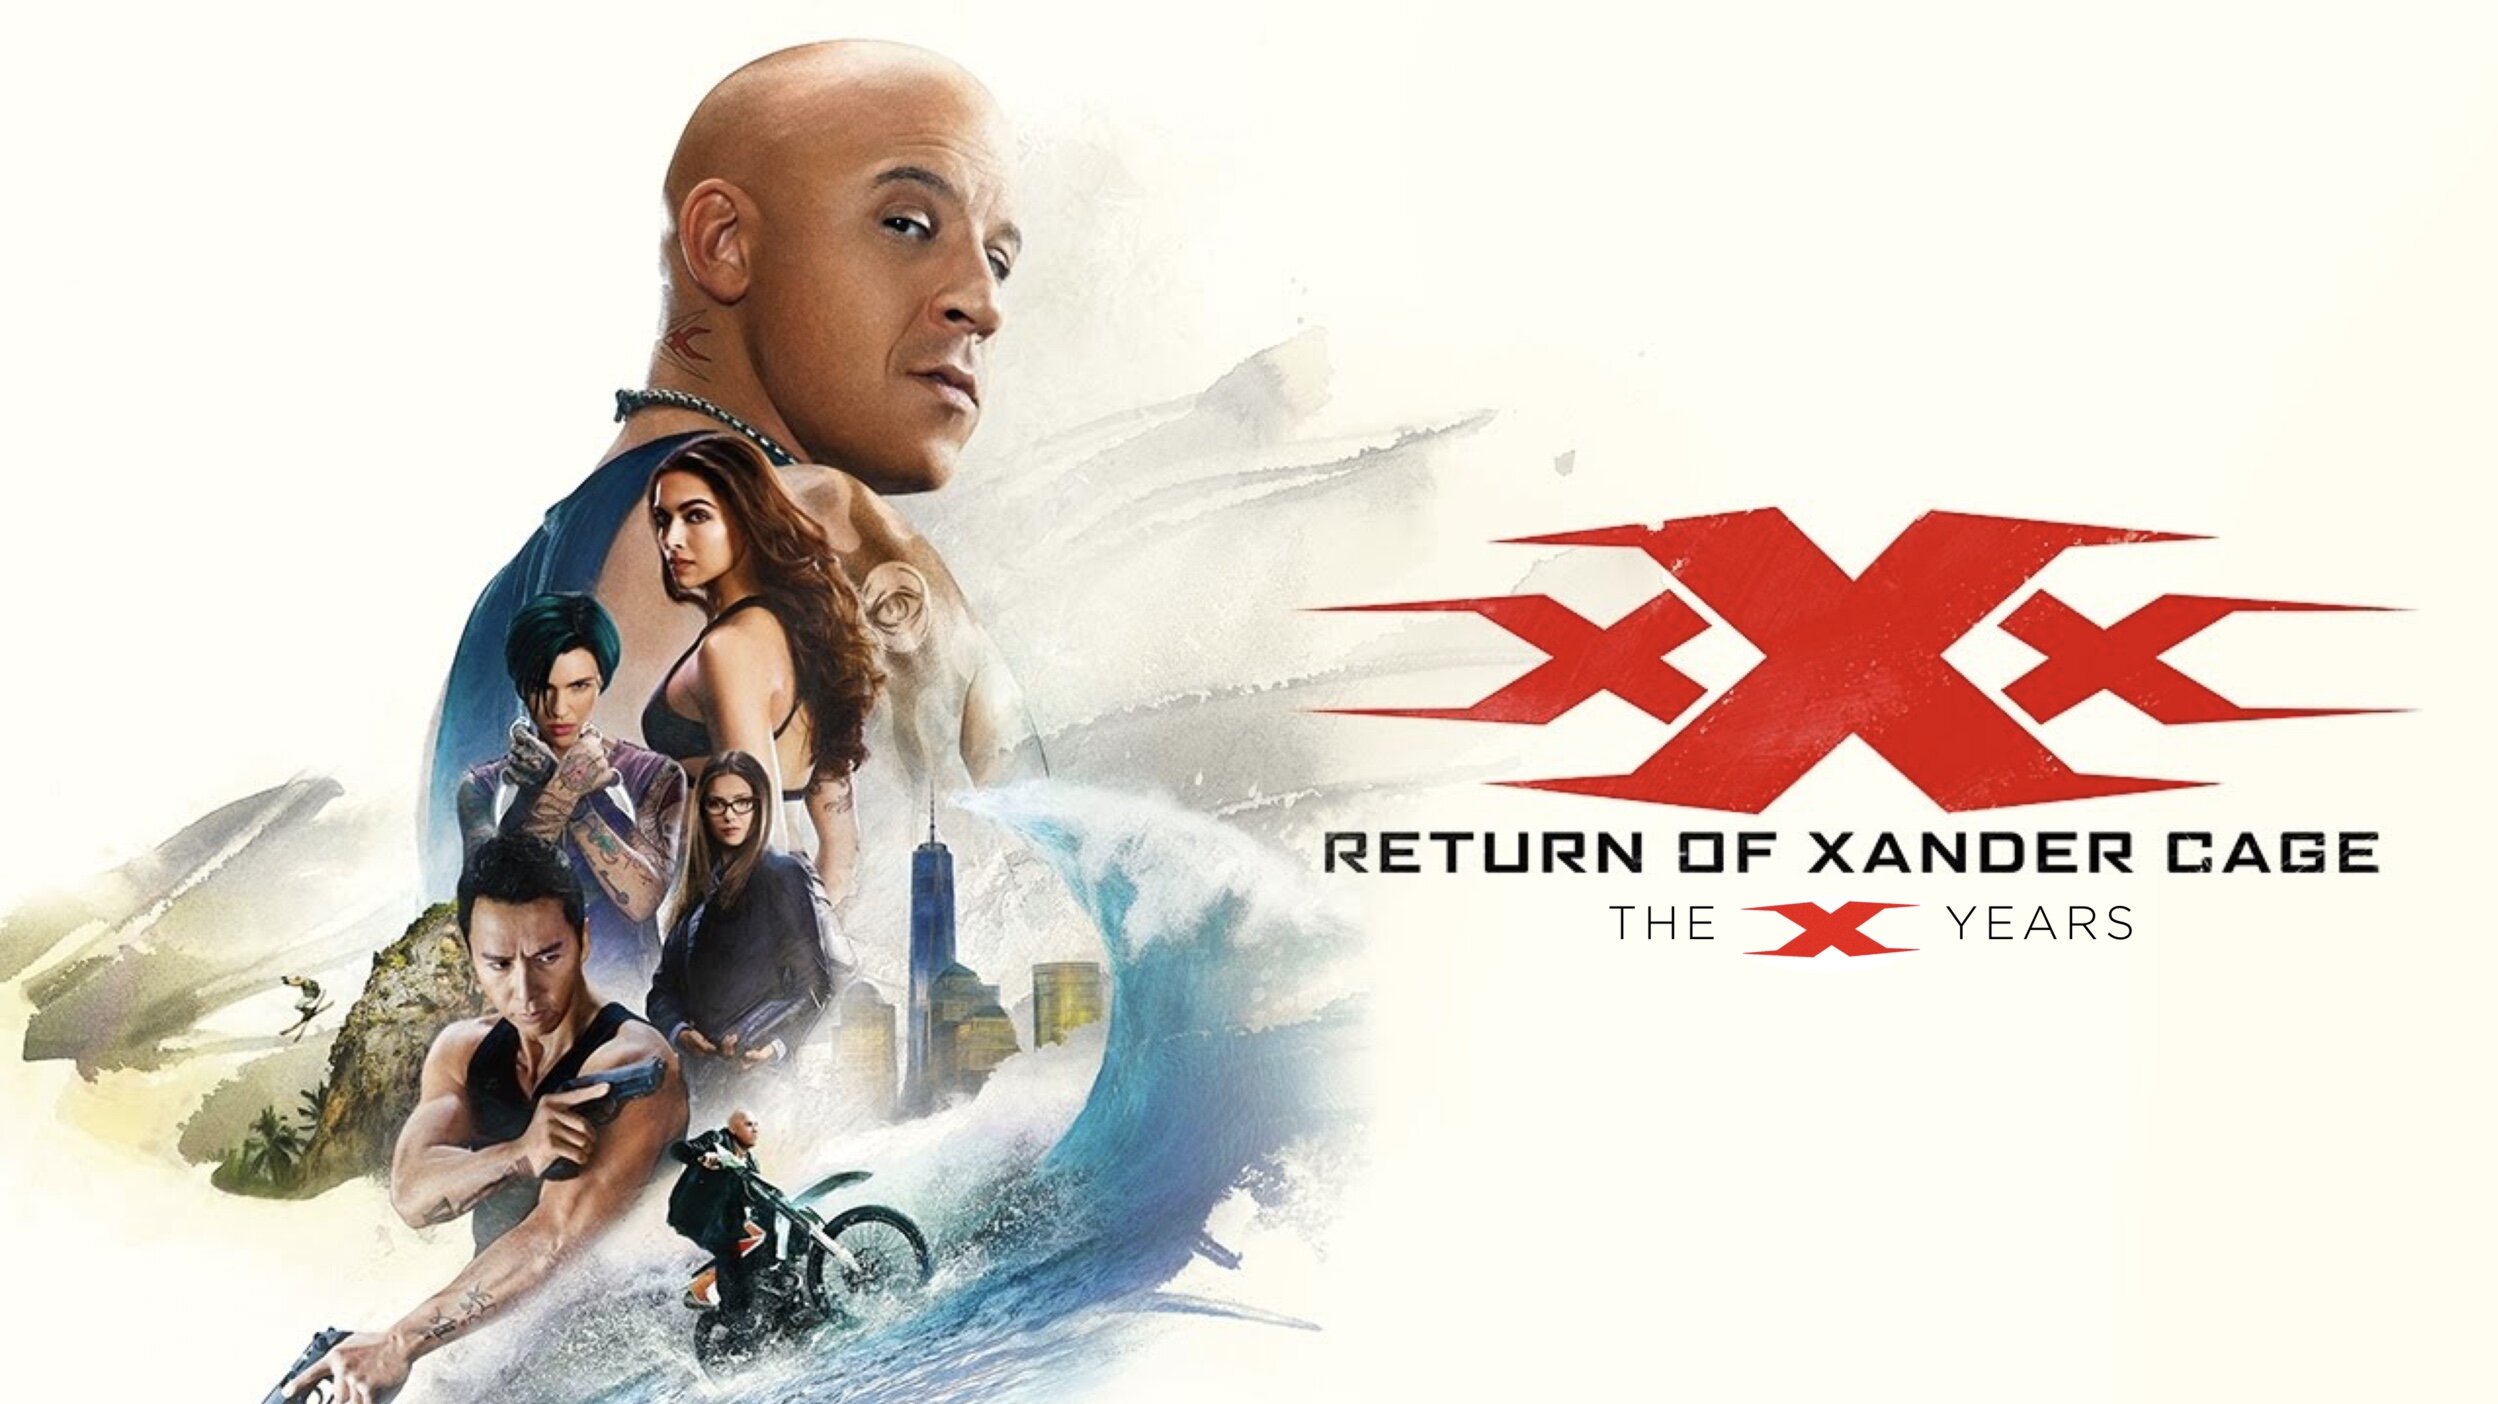 xXx: Return of Xander Cage — The X Years